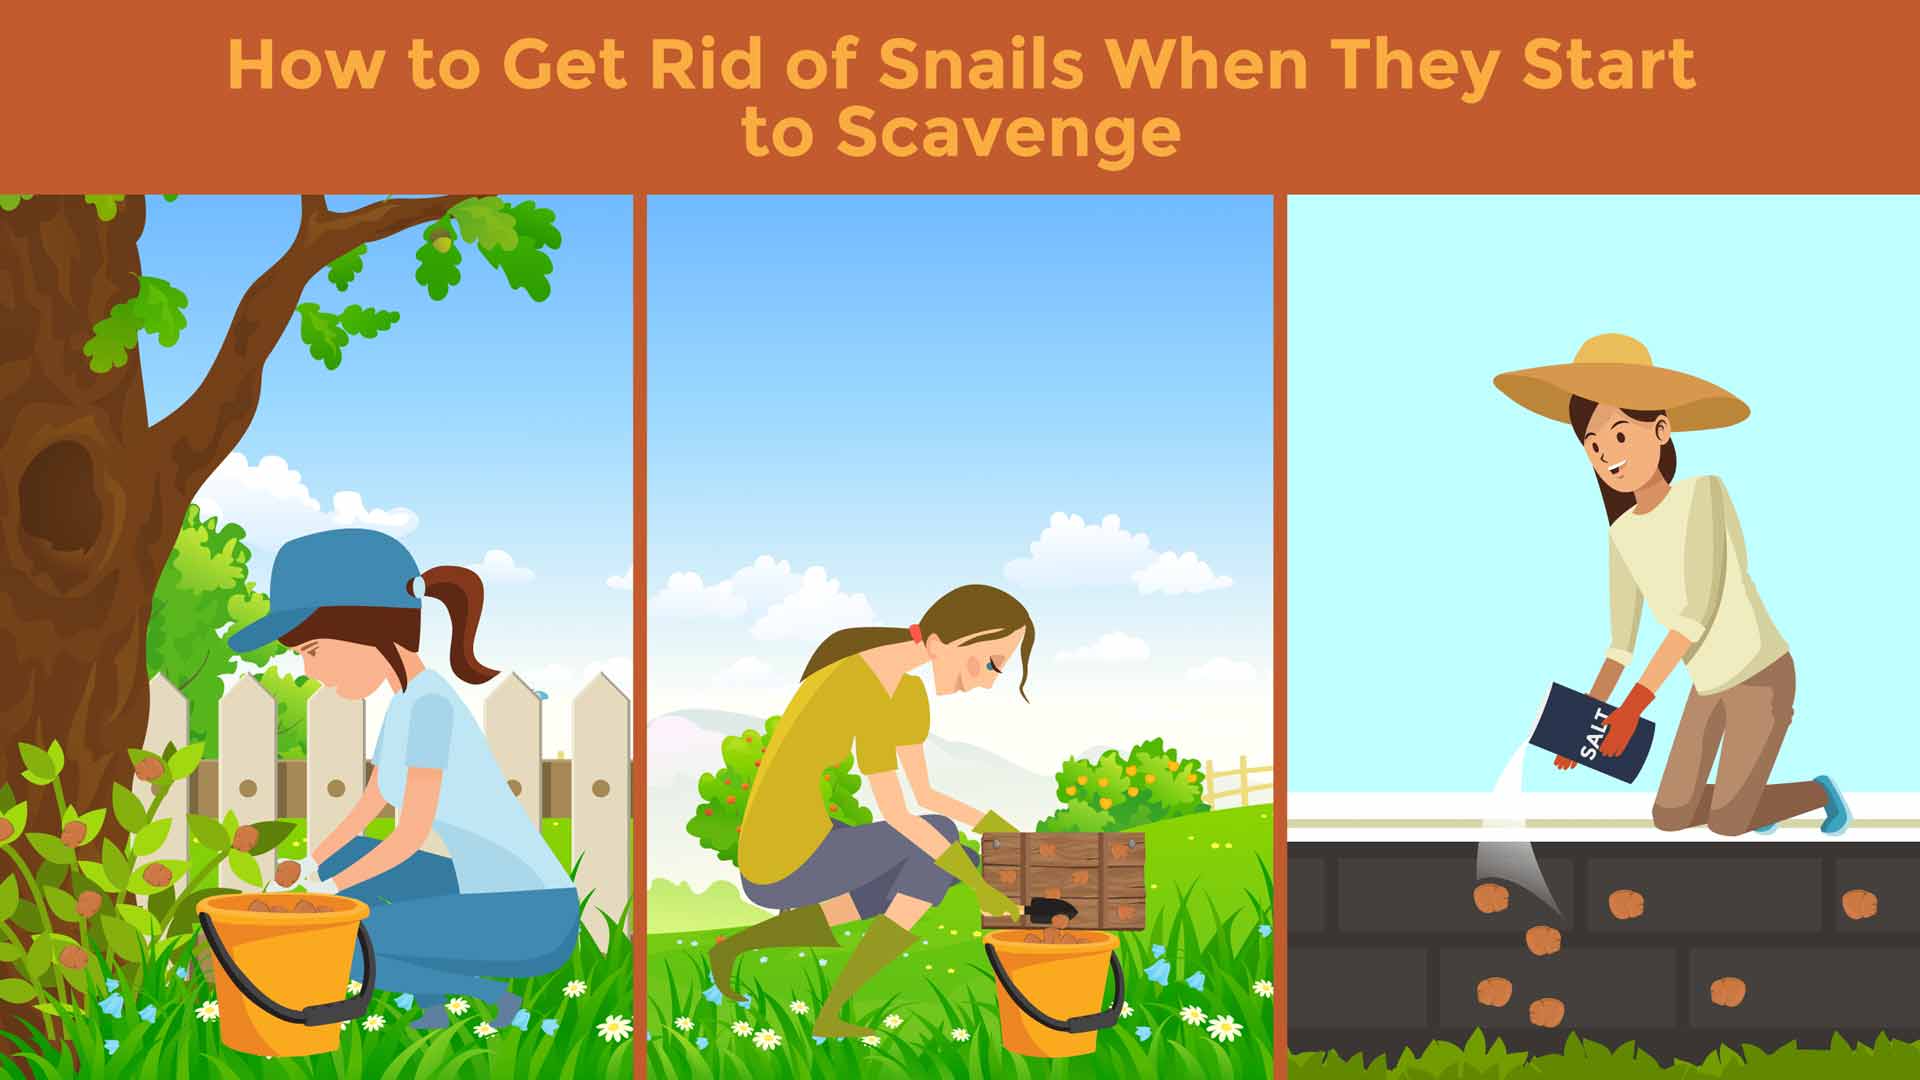 Illustration showcasing three different ways to get rid of snails when you find them in your yard or garden. 